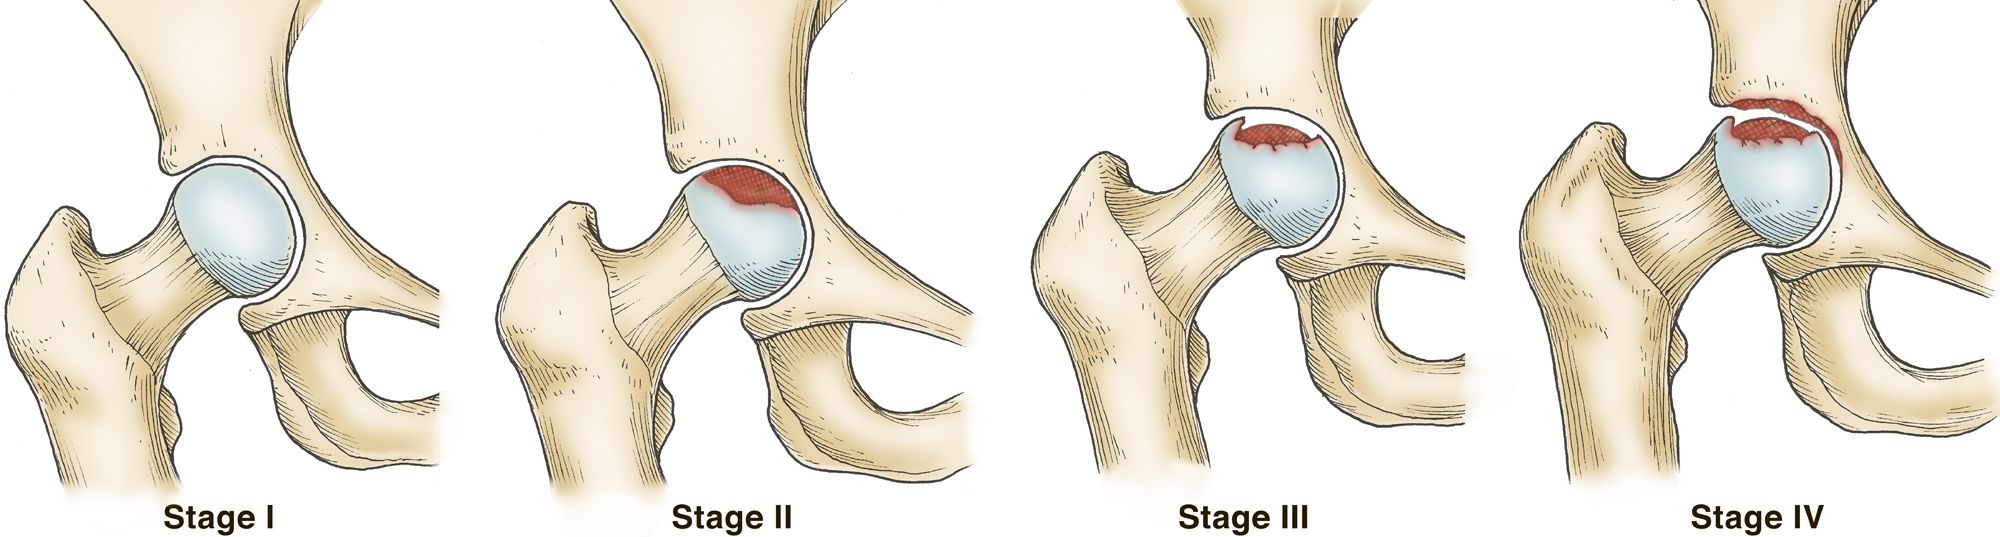 Stages of osteonecrosis of the hip